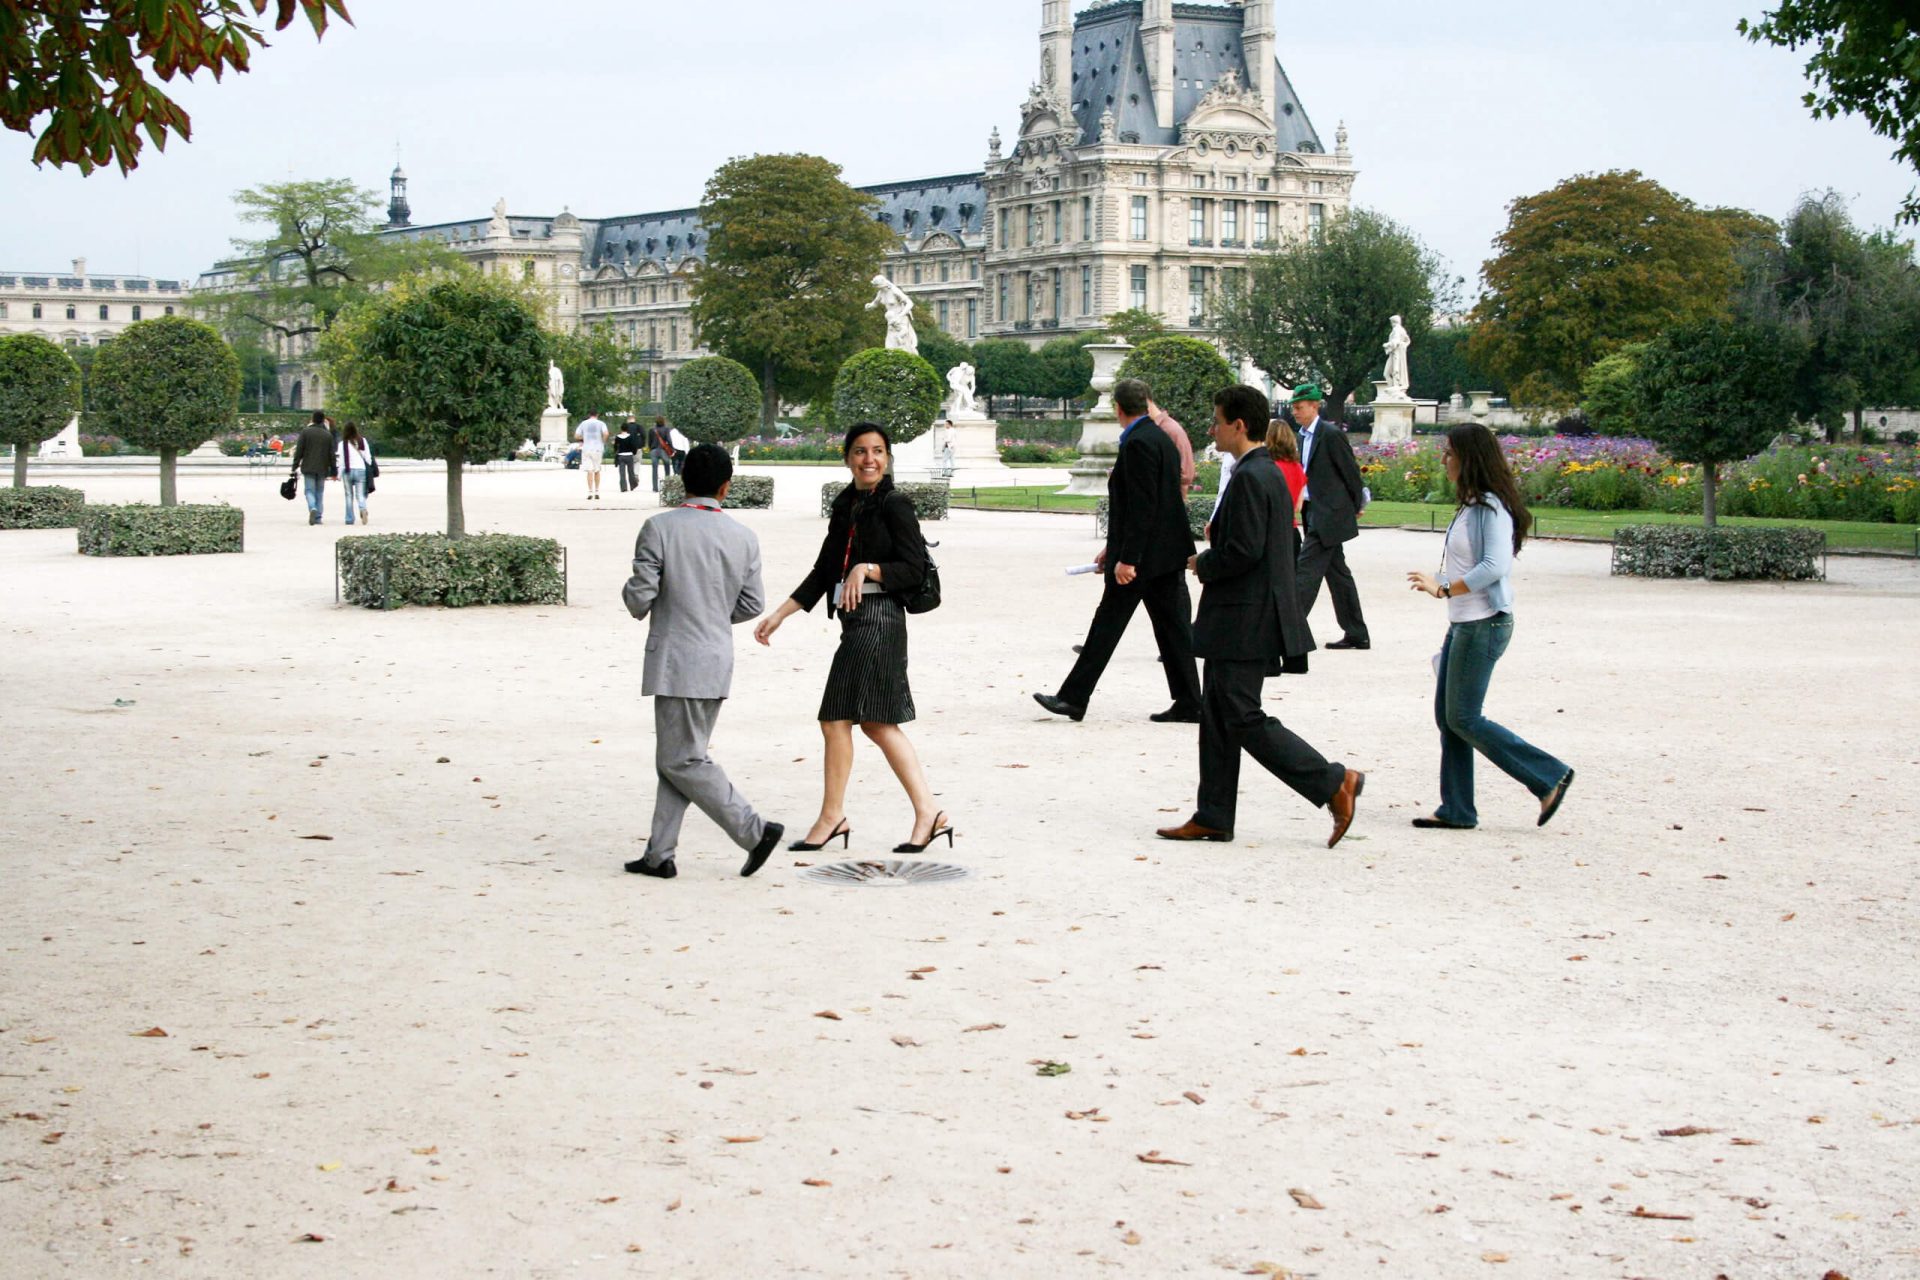 Team building rally, a team crosses the Tuileries Gardens towards the Louvre